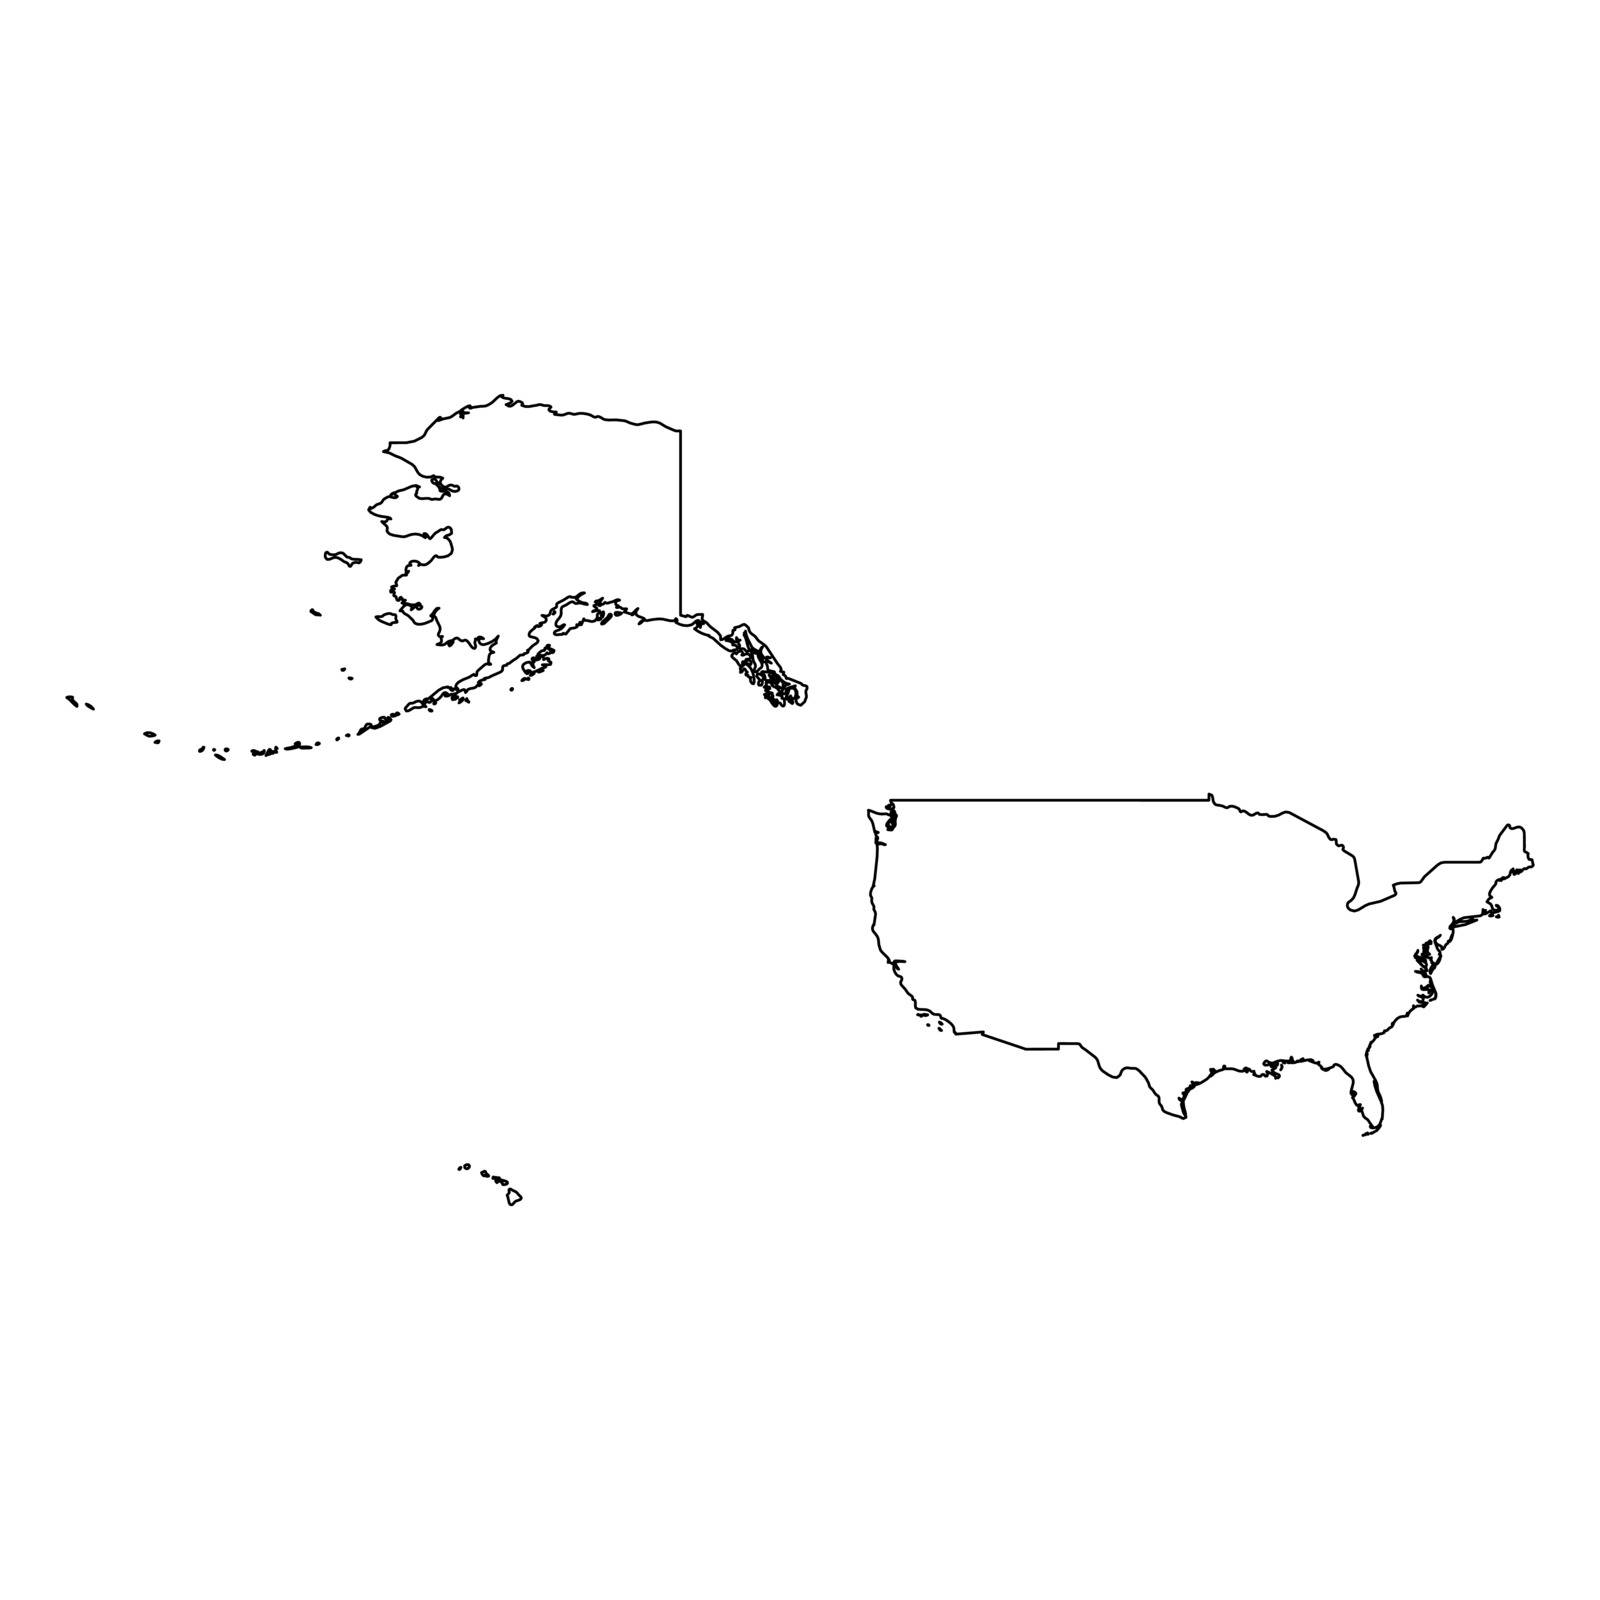 United States of America, USA - solid black outline border map of country area. Simple flat vector illustration.